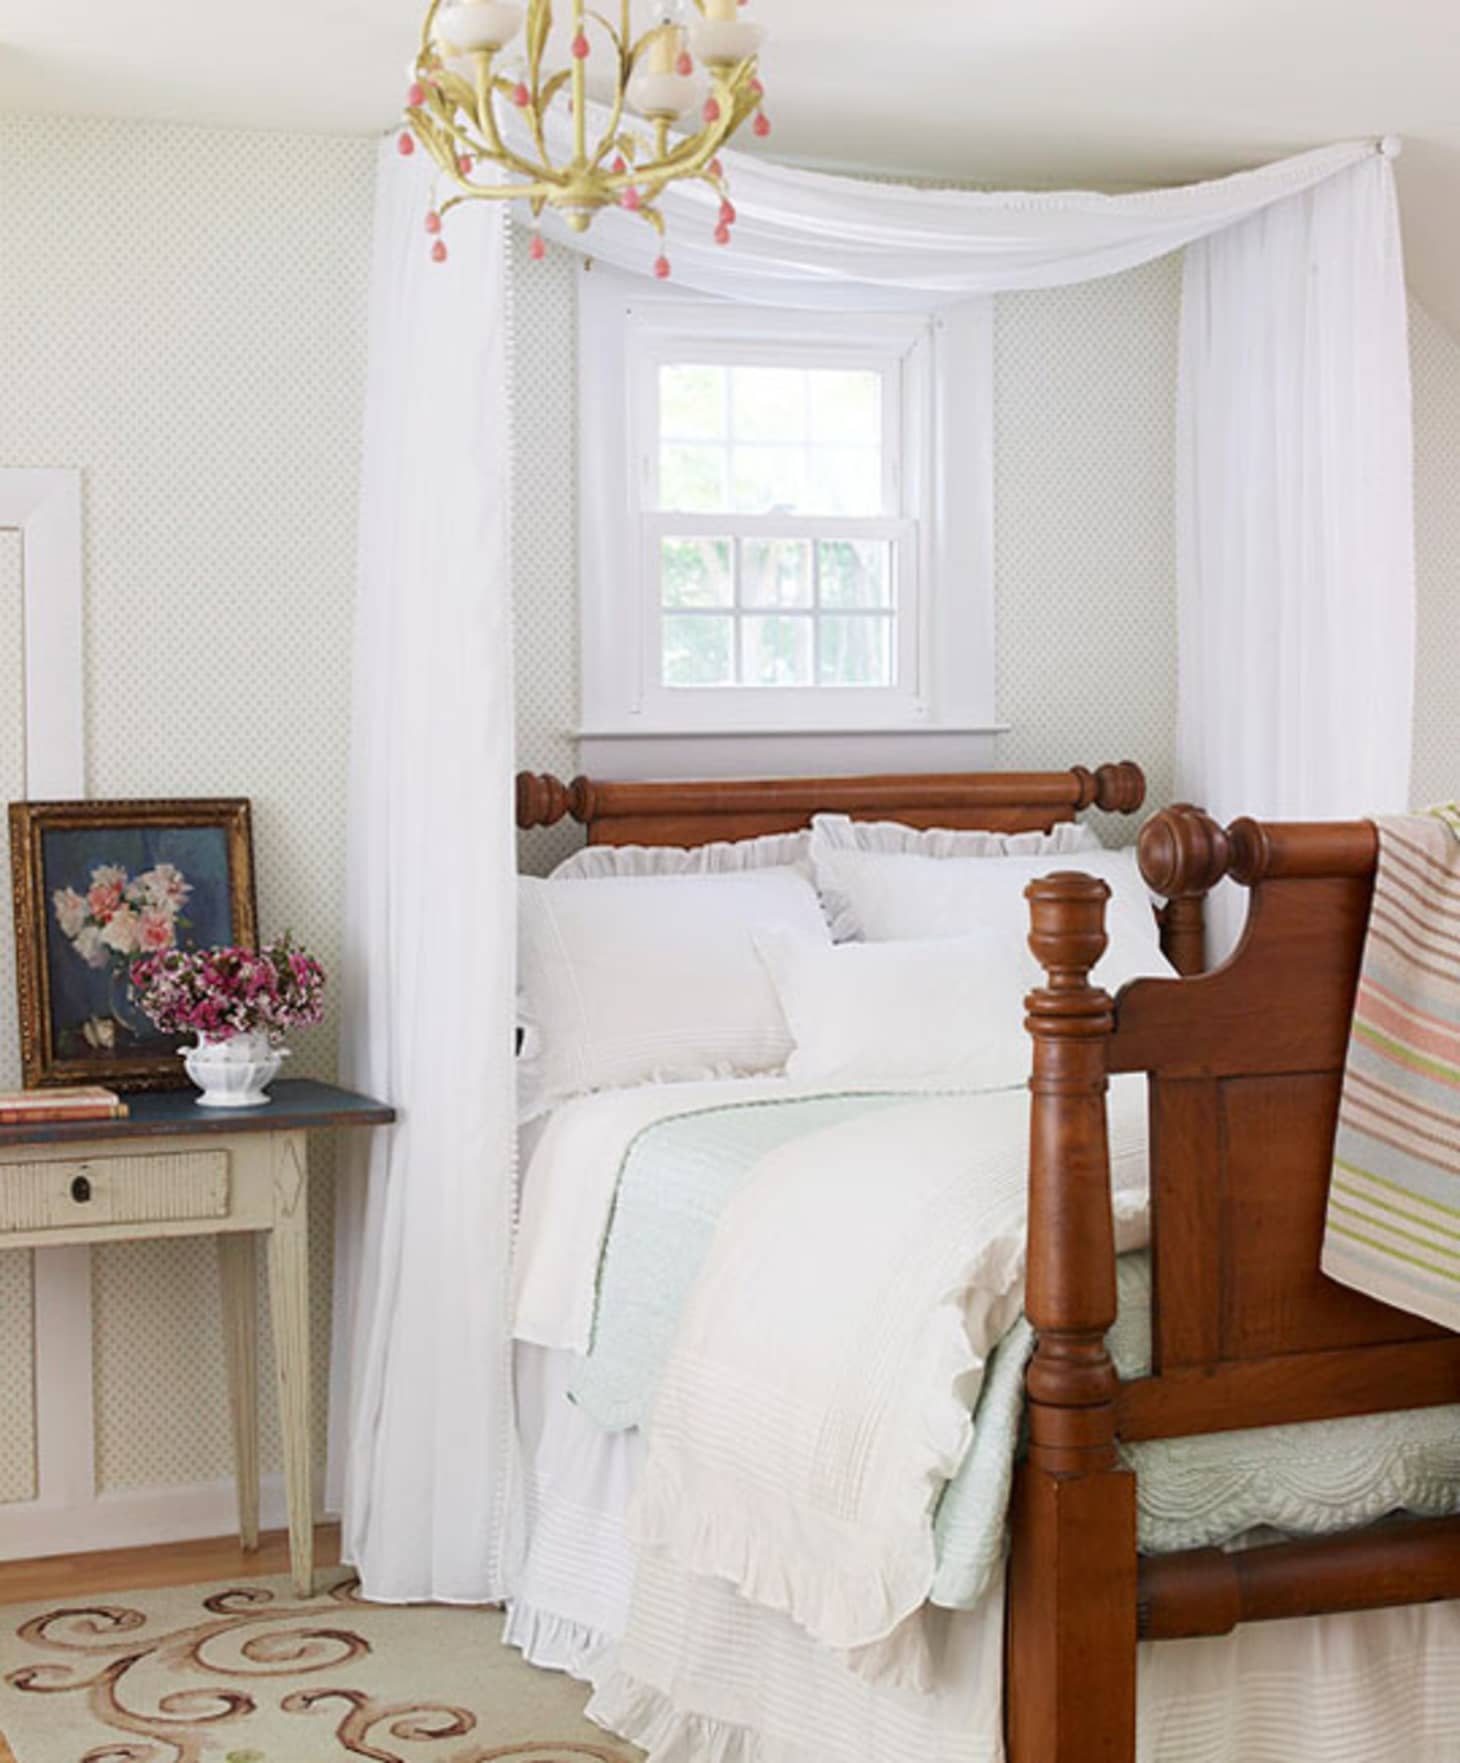 Diy Ideas For Getting The Look Of A Canopy Bed Without